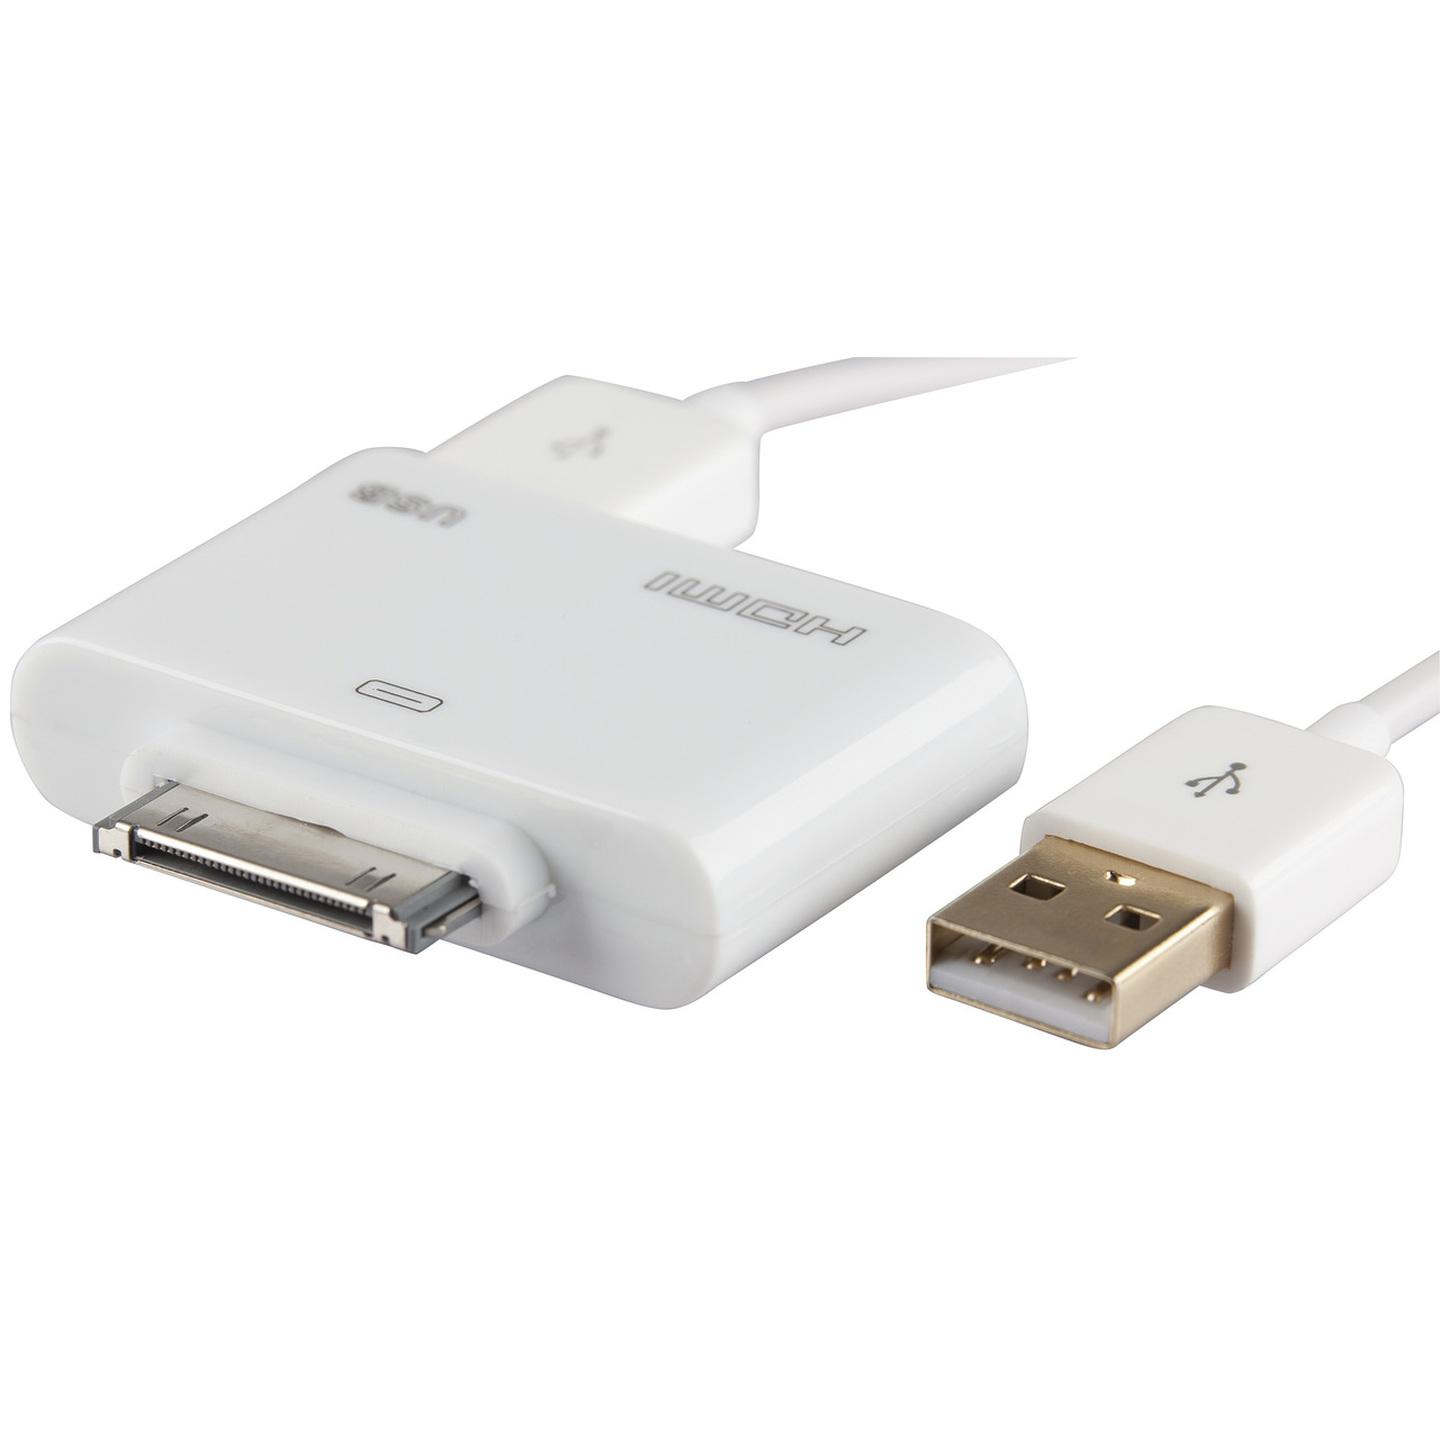 HDMI Converter for iPad/iPhone/iTouch